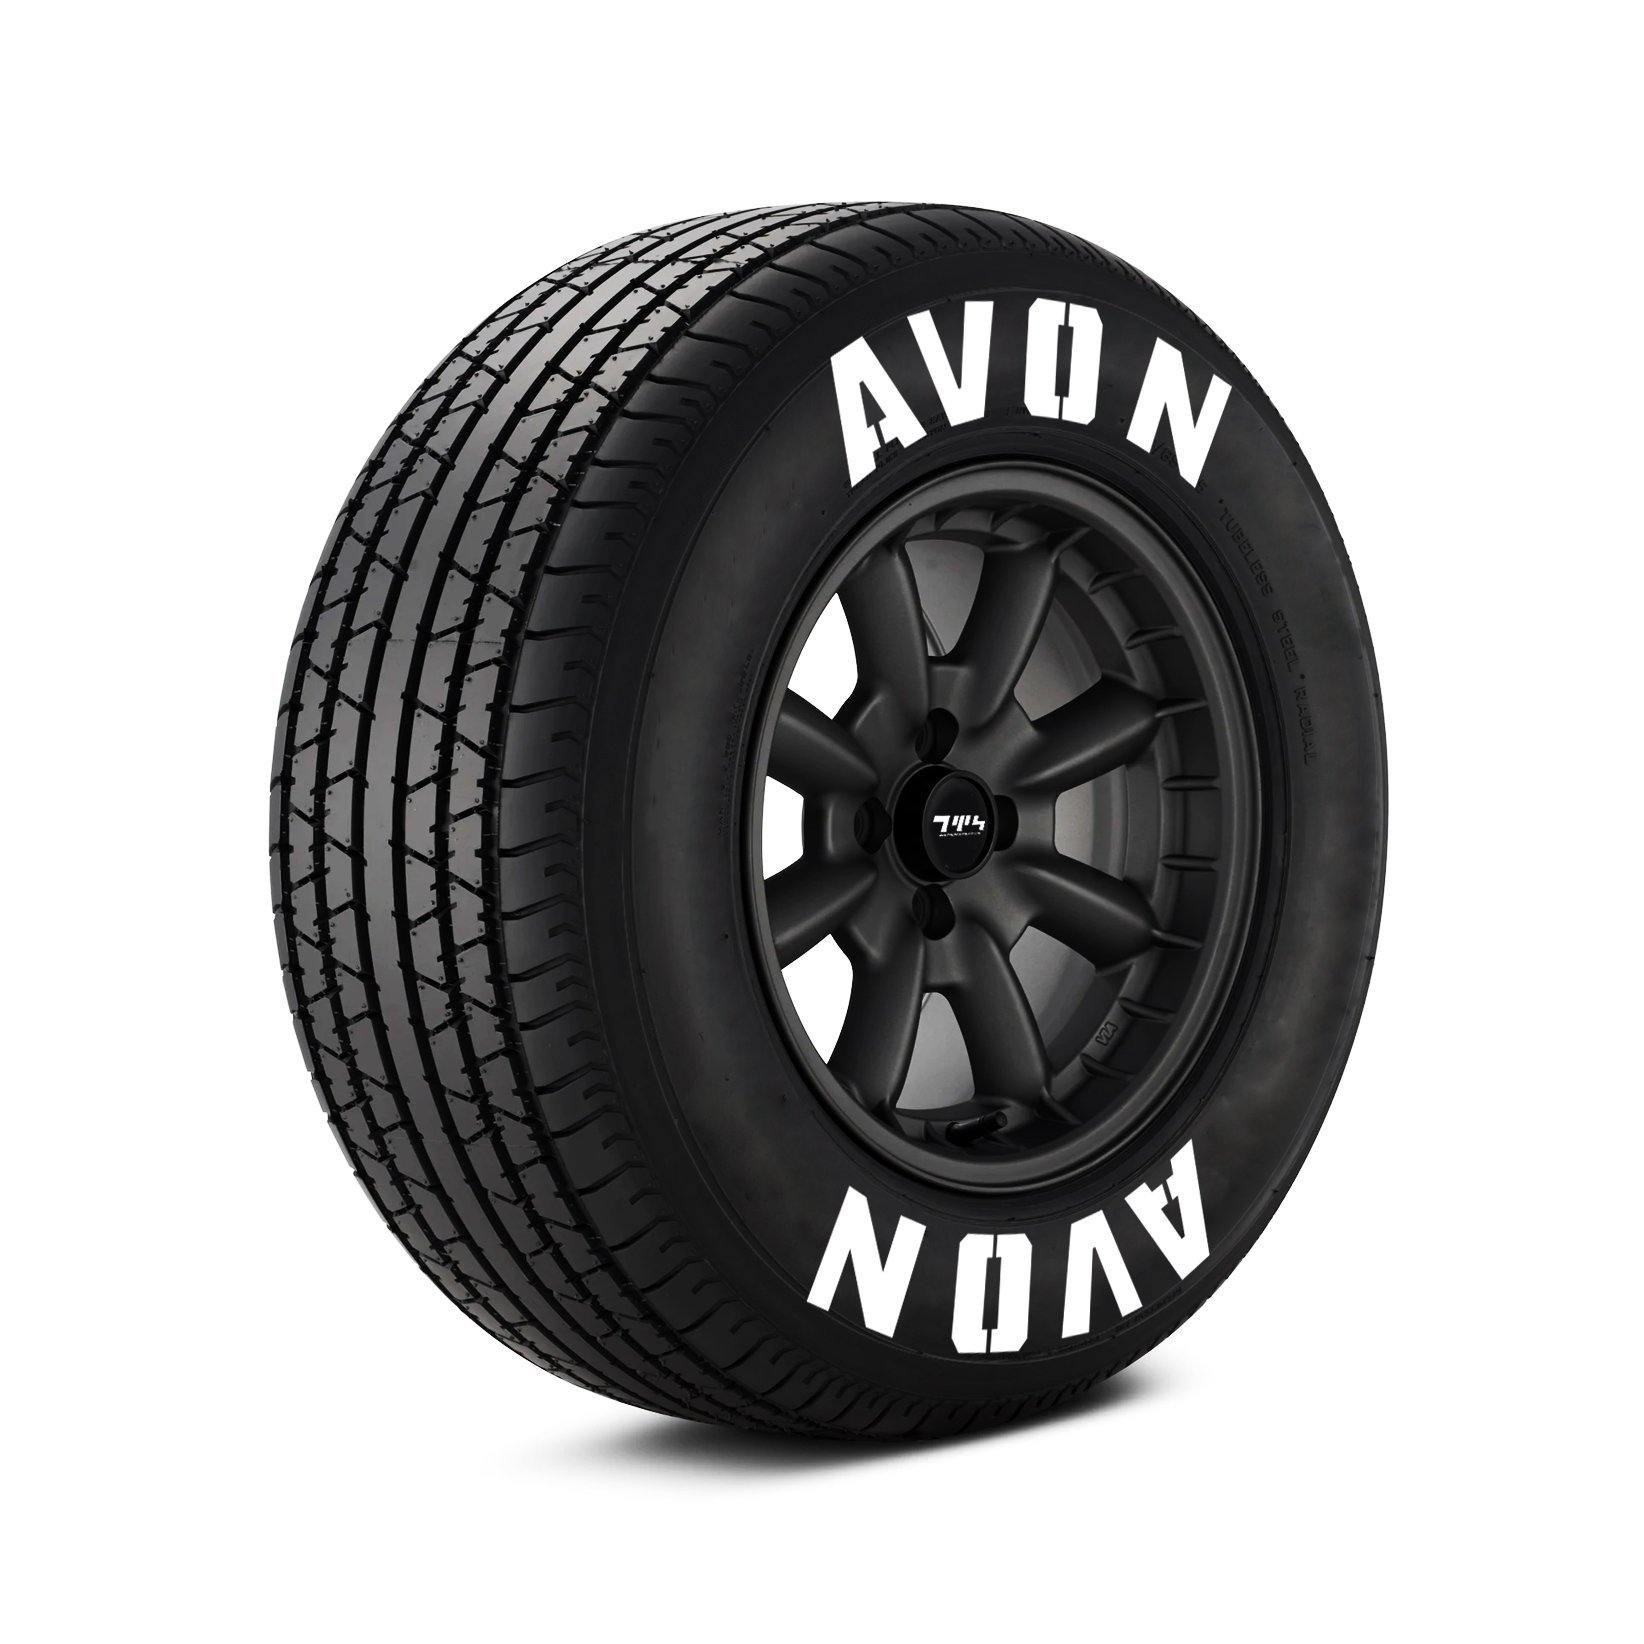 AVON (LARGE) Tyre Stickers - Tyre Wall Stickers